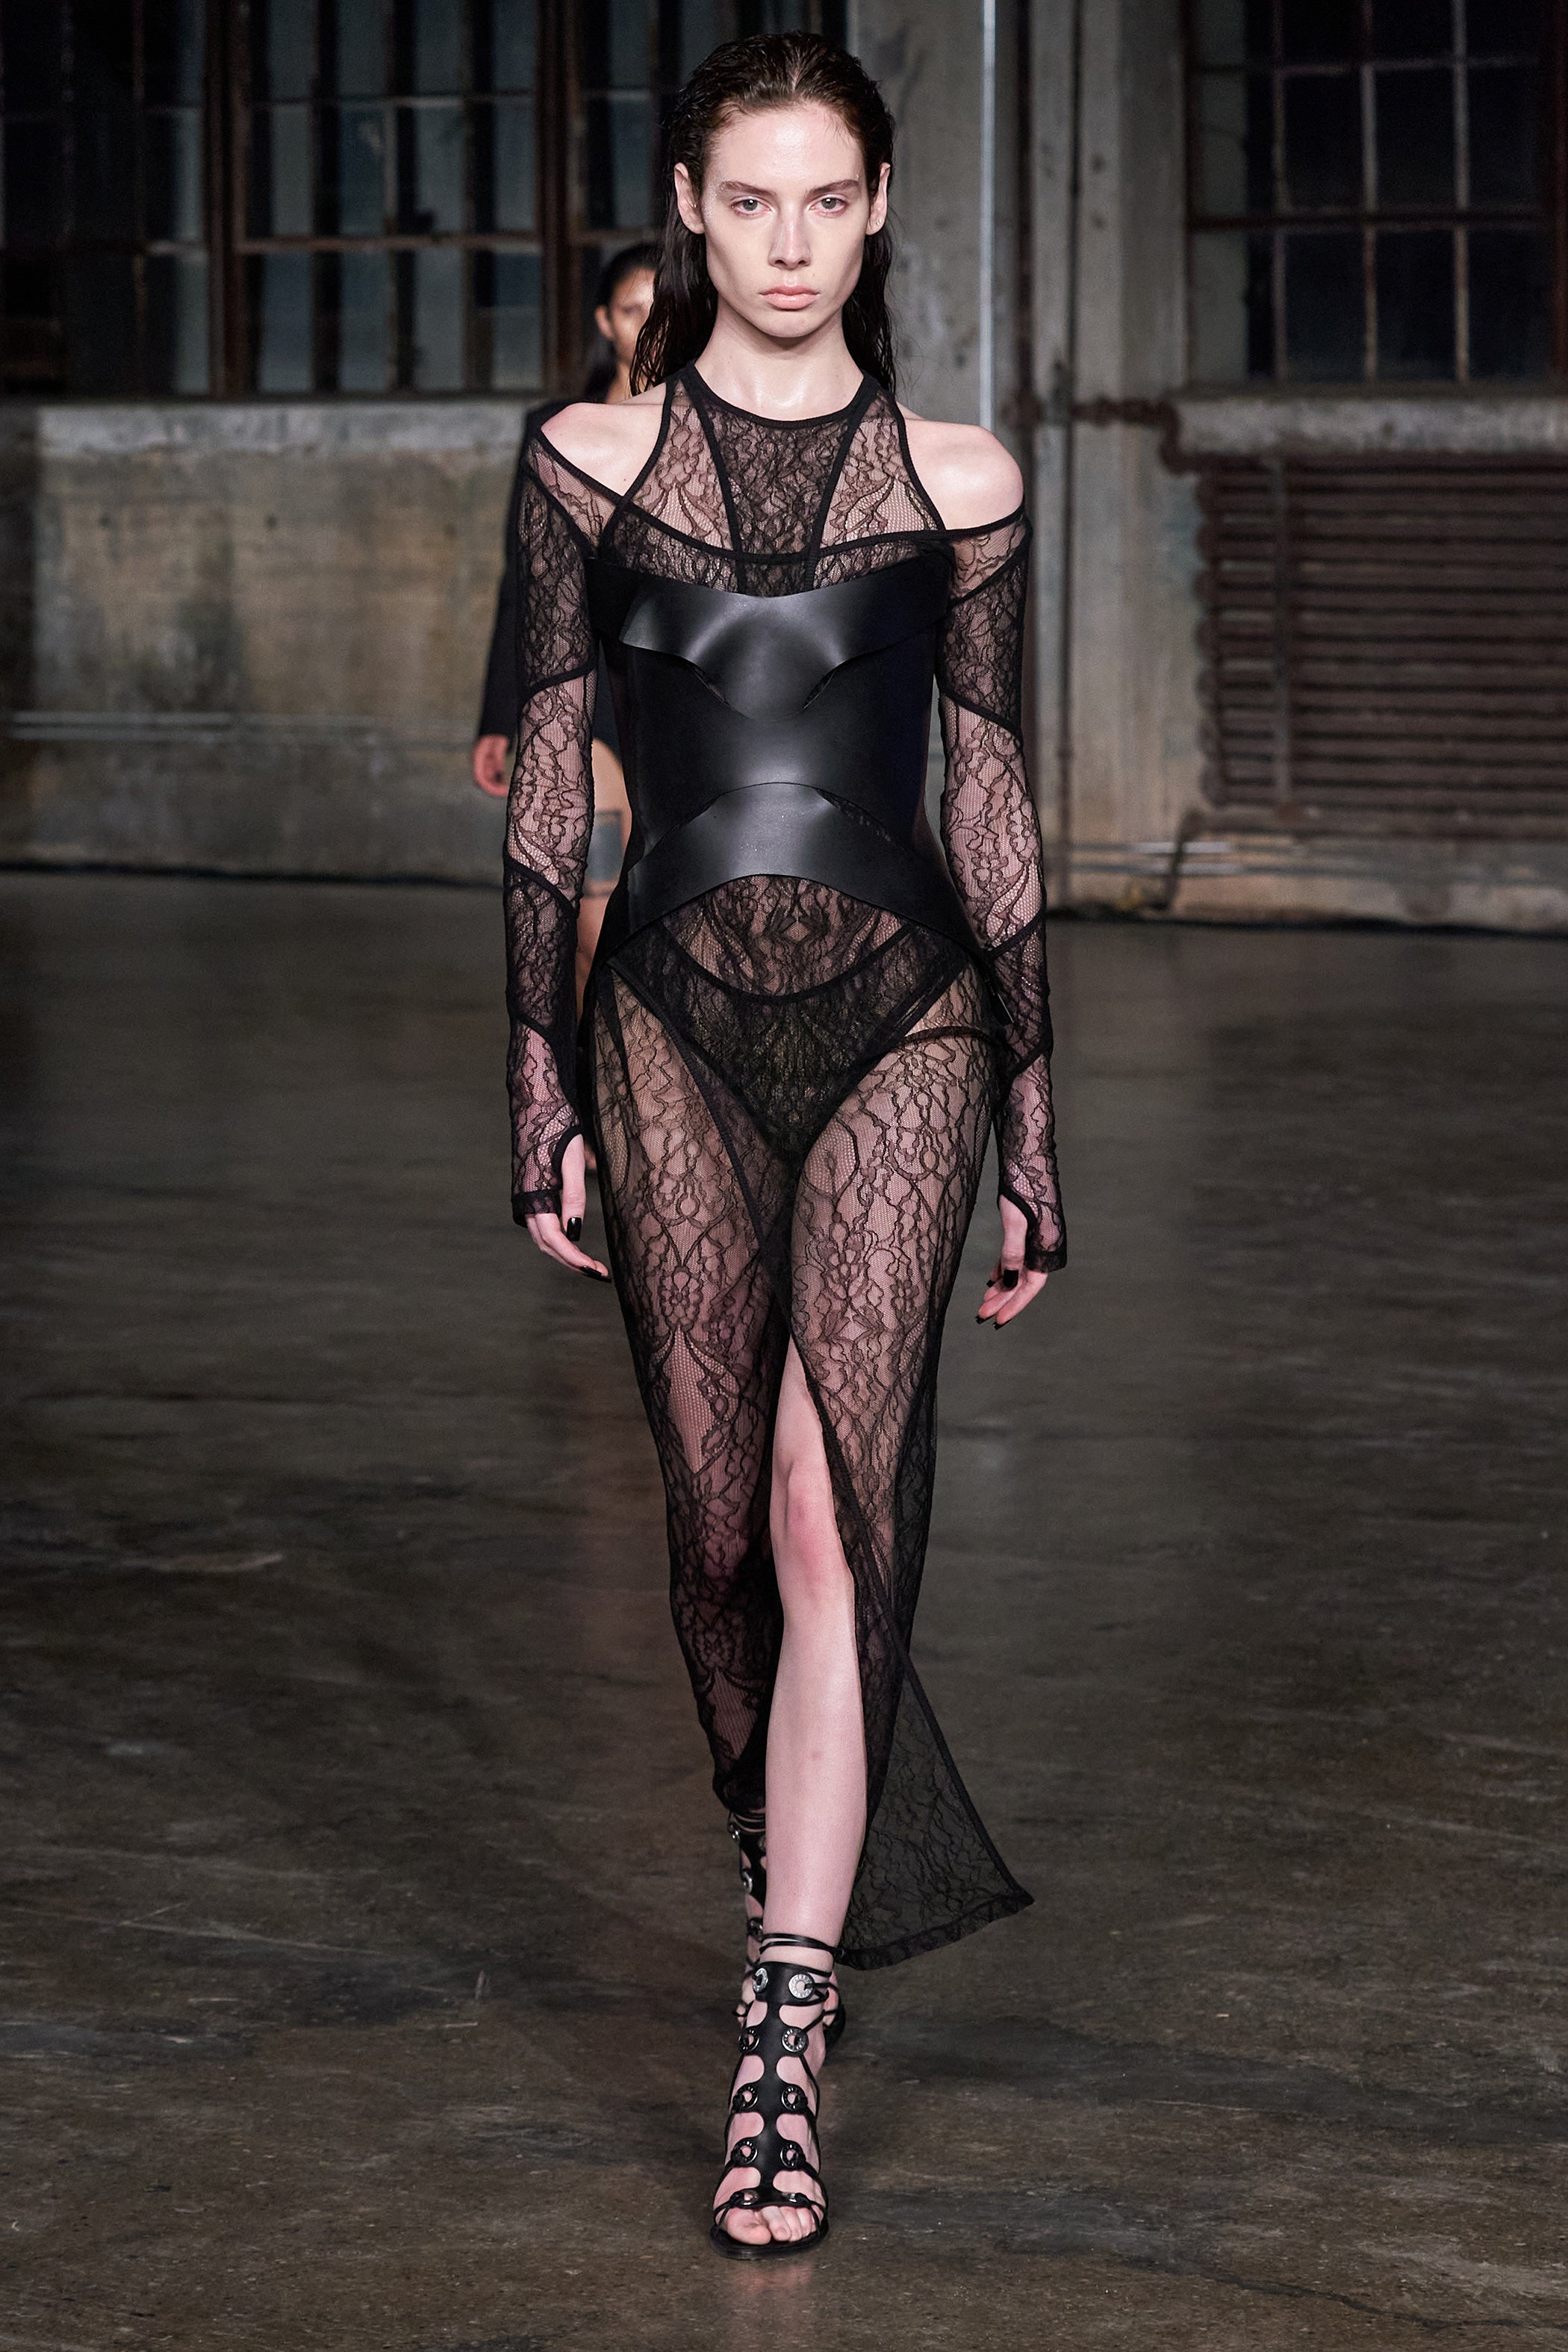 How Wearable Is Leather Harness Fashion